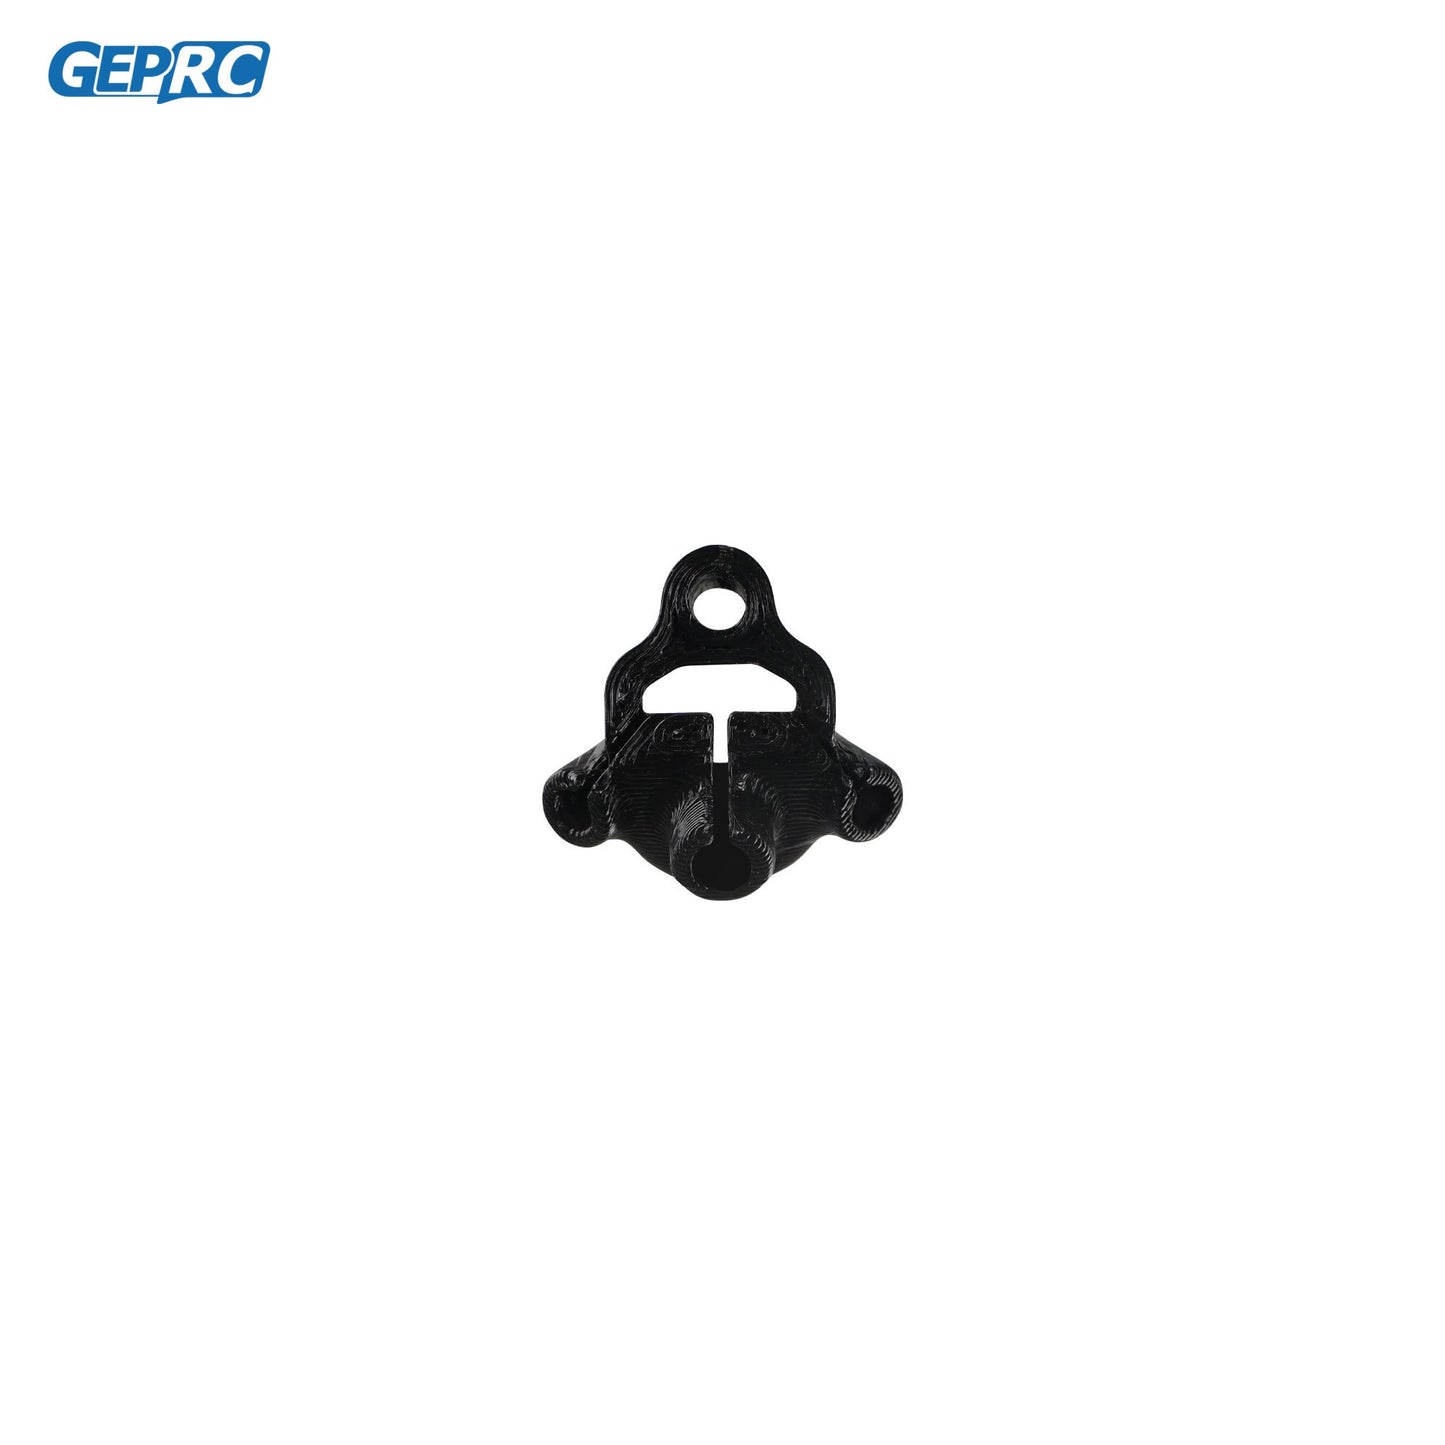 GEPRC GEP-CT30 O3 Frame Parts - Upgrade Package 3D Printing Aluminum Parts Base Quadcopter FPV Freestyle RC Racing Drone Cinebot30